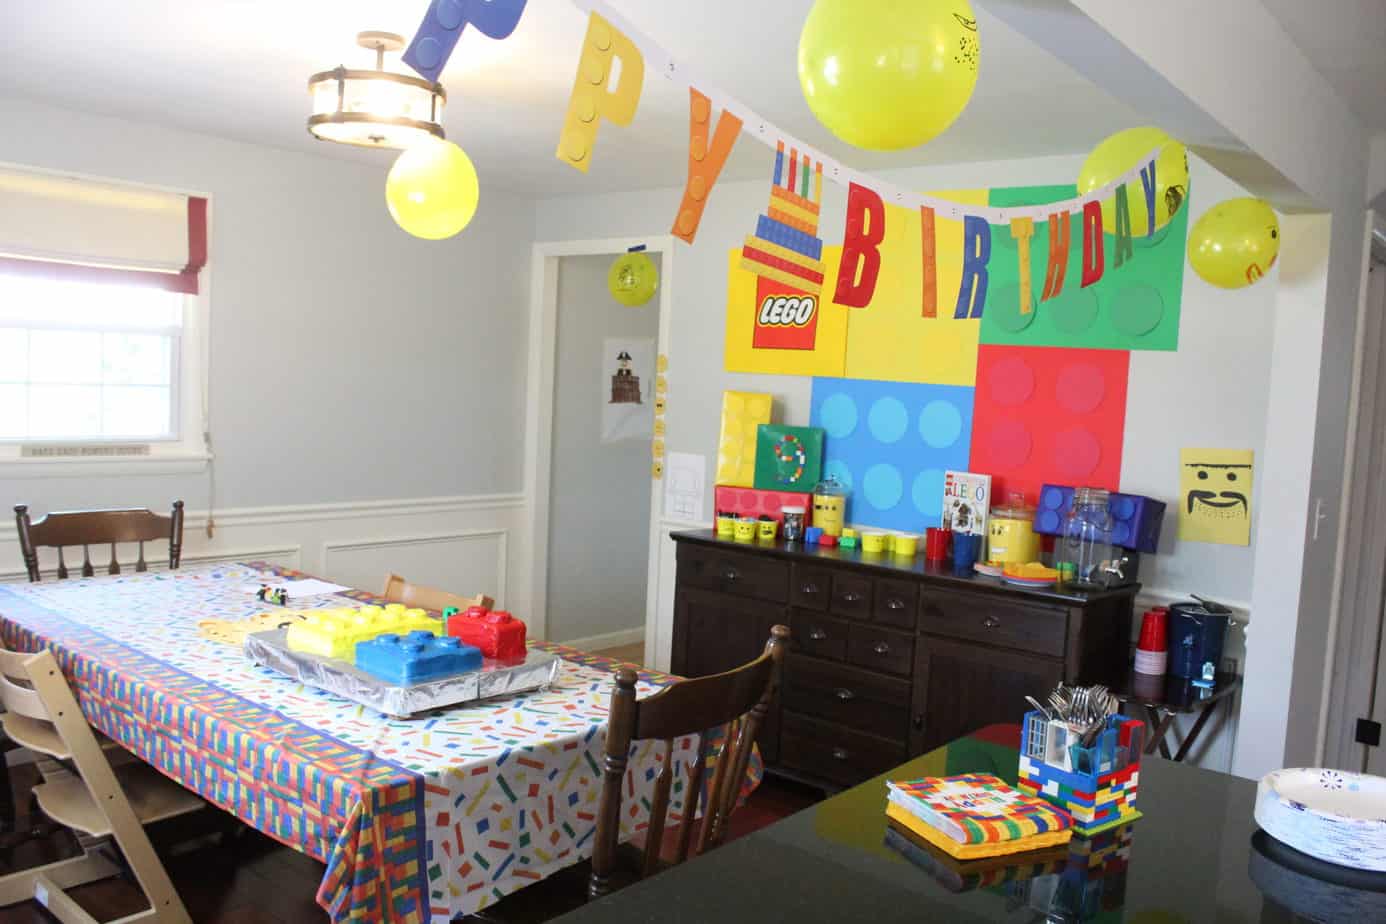 Lego Birthday Party Ideas (Don't miss this epic party!)